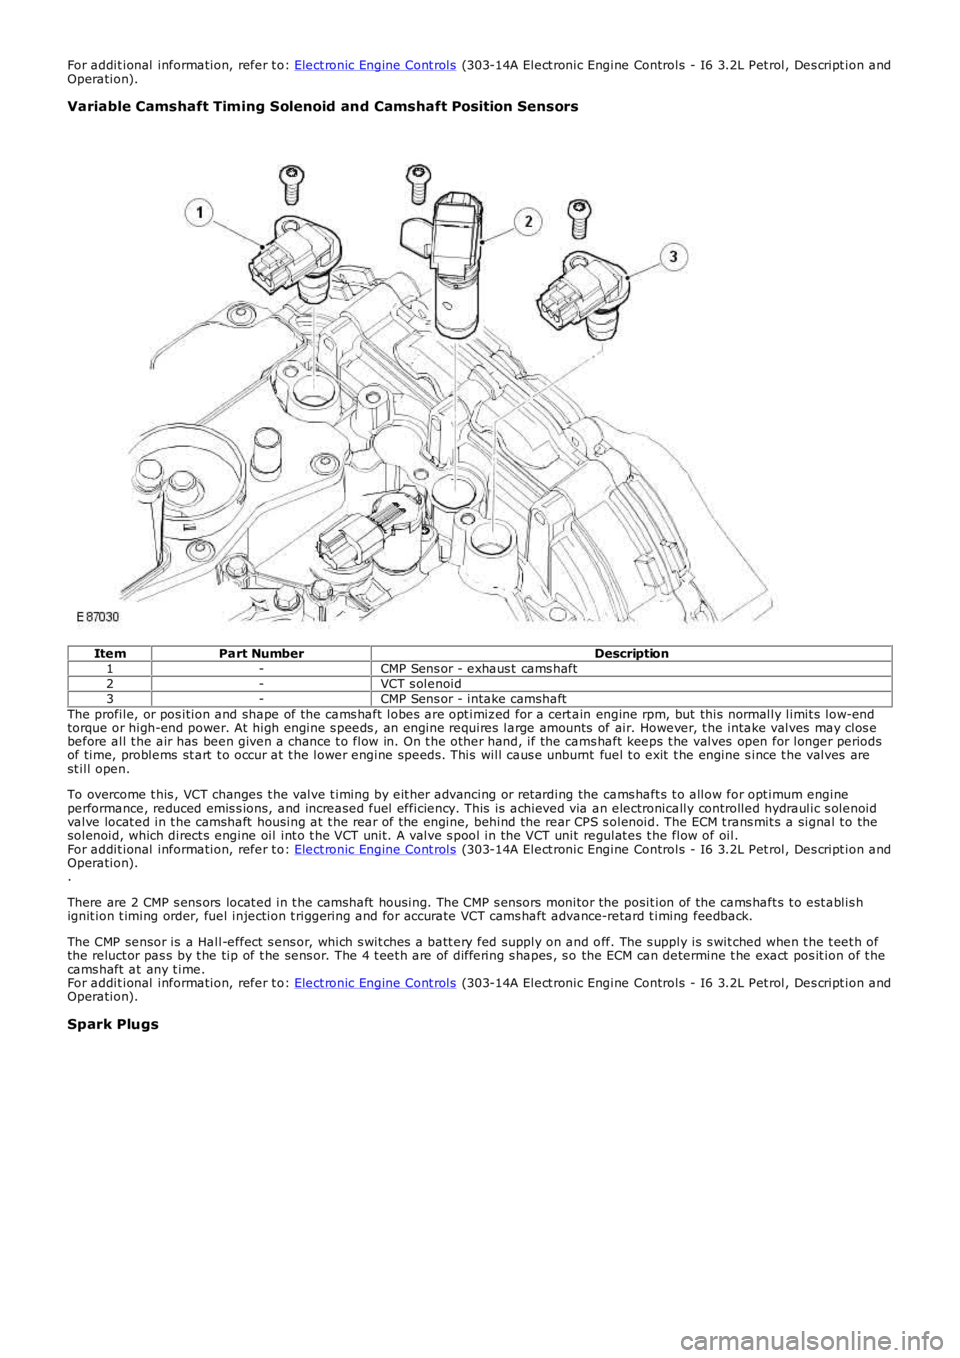 LAND ROVER FRELANDER 2 2006  Repair Manual For addit ional information, refer t o: Elect ronic Engine Cont rols (303-14A Elect ronic Engine Controls - I6 3.2L Pet rol, Des cript ion andOperation).
Variable Camshaft Timing Solenoid and Camshaft